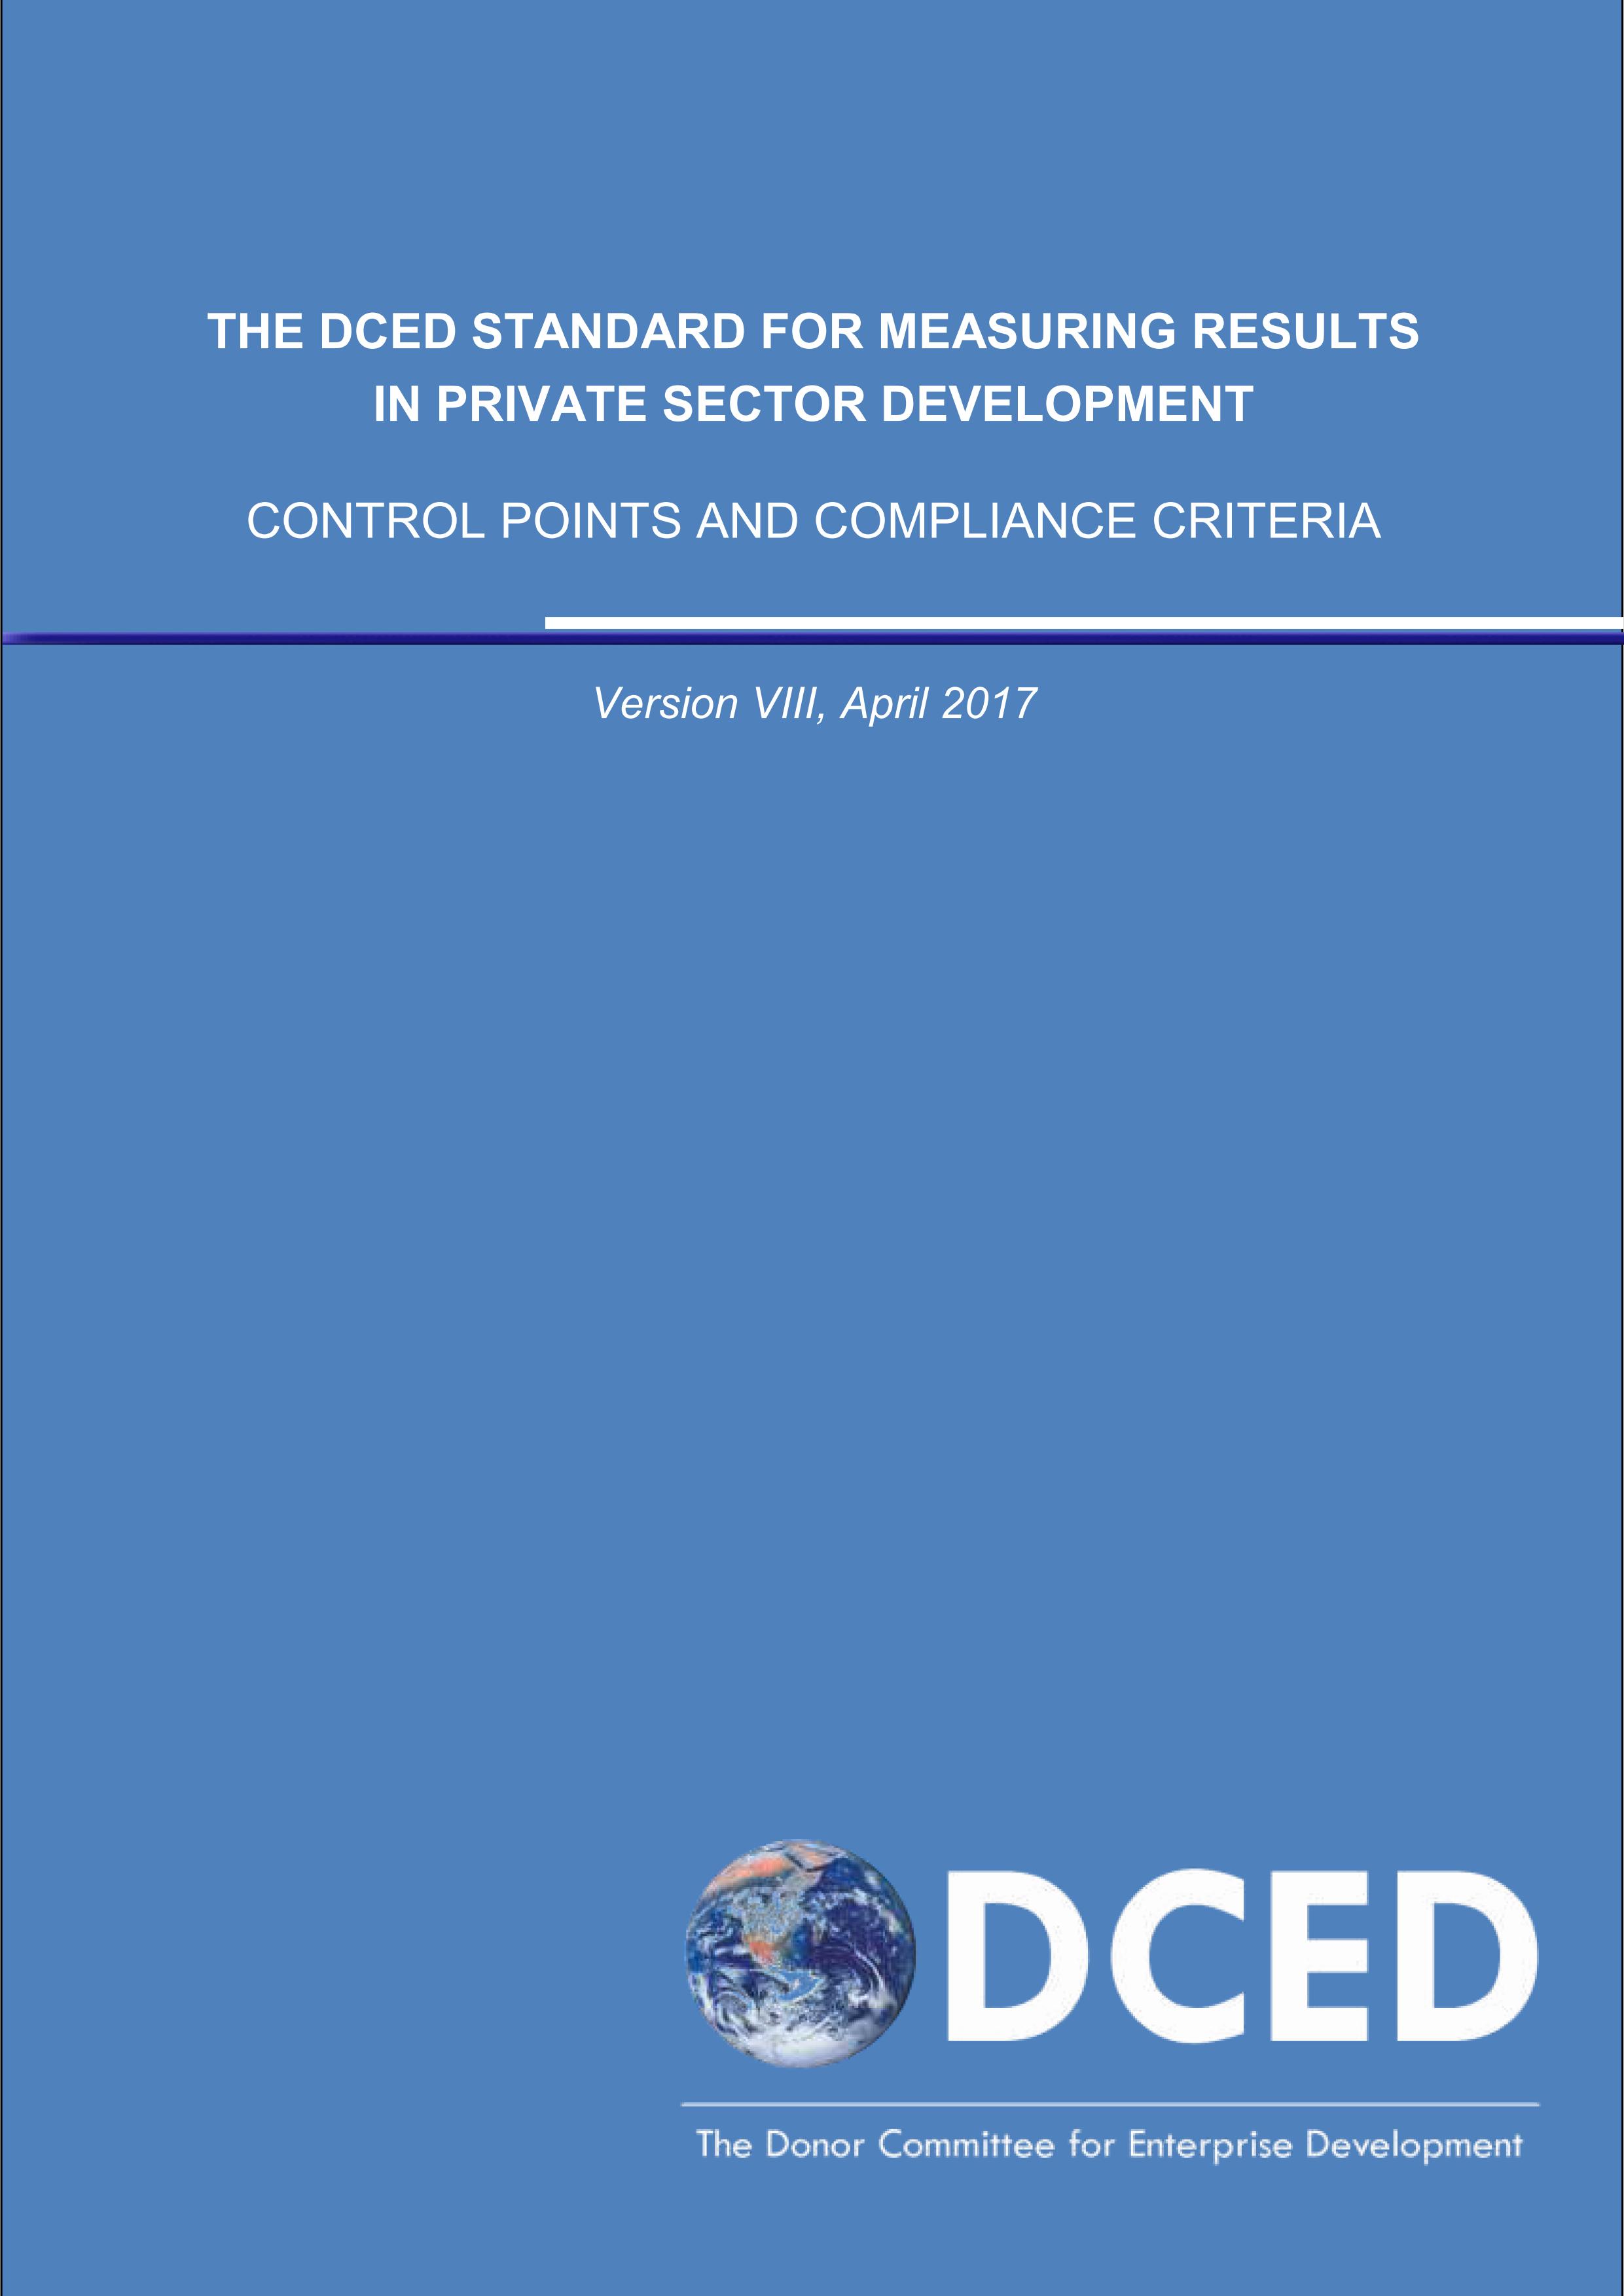 The DCED Standard for Measuring Results in Private Sector Development